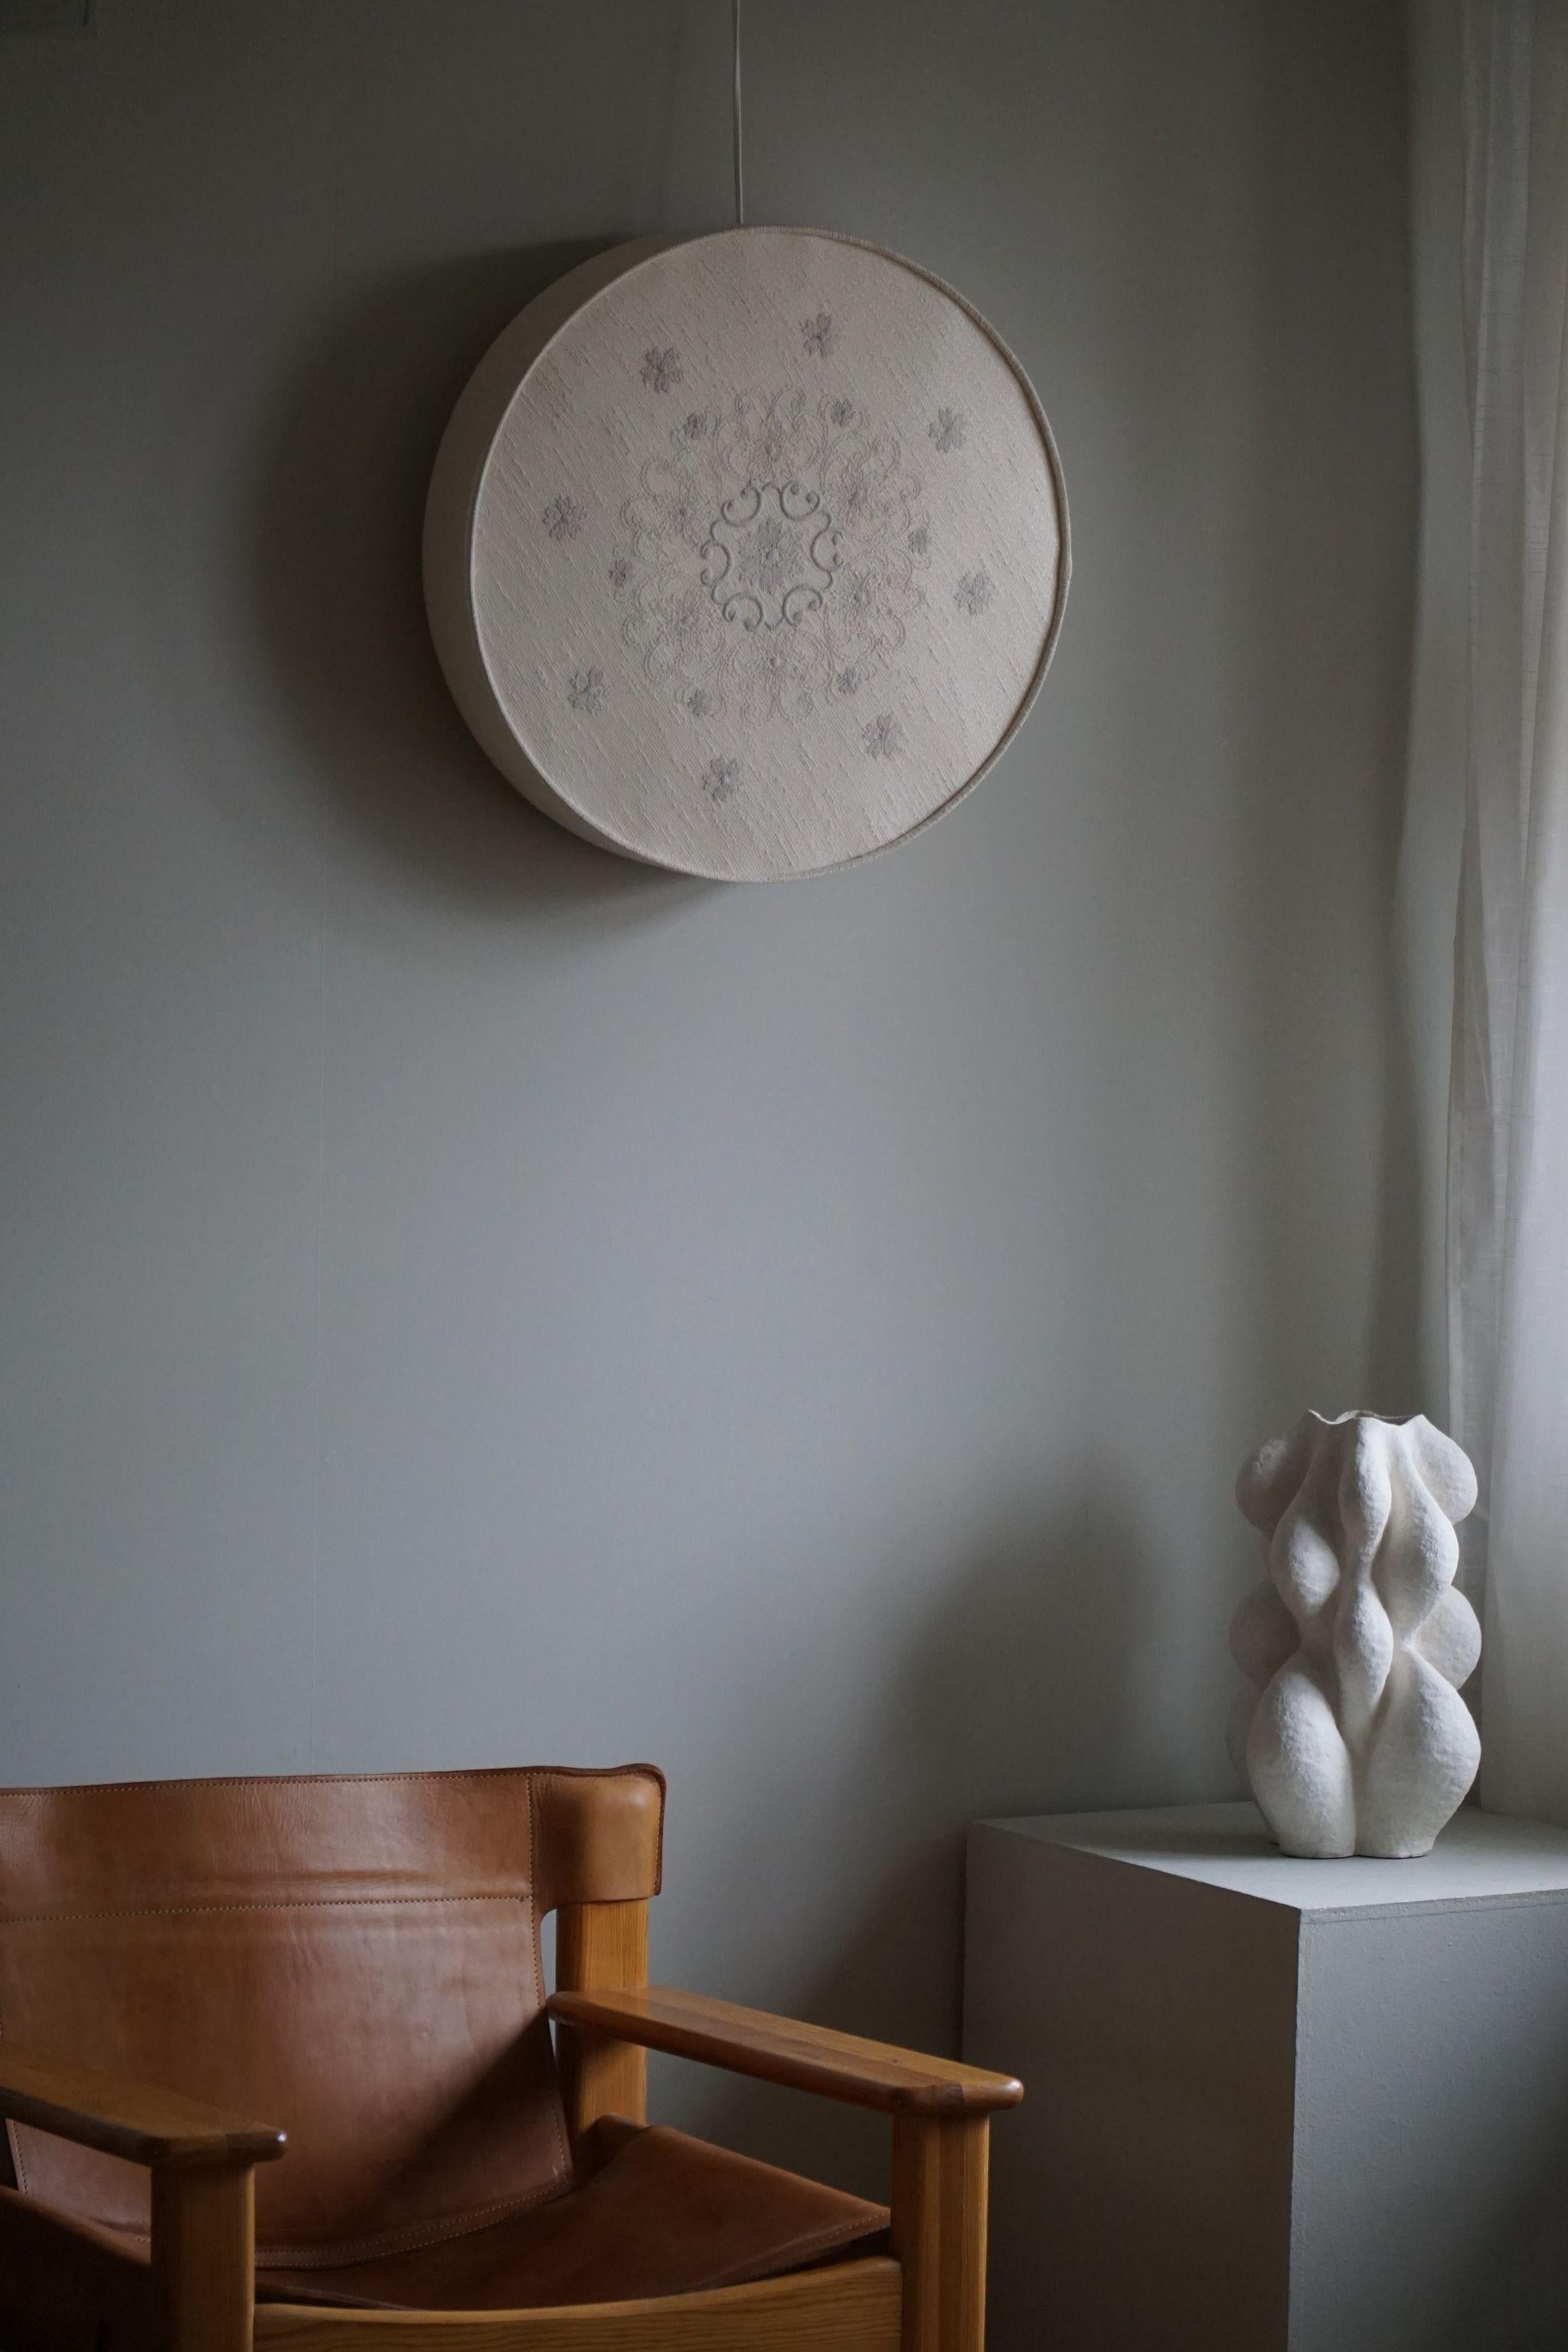 A beautiful round ceiling/wall sconce made of linen & silk. Made in Sweden in the 1960s, with a great sense of the elegance and simplicity characteristic of the Swedish Mid Century era. The fixture features a circular shape with a combination of